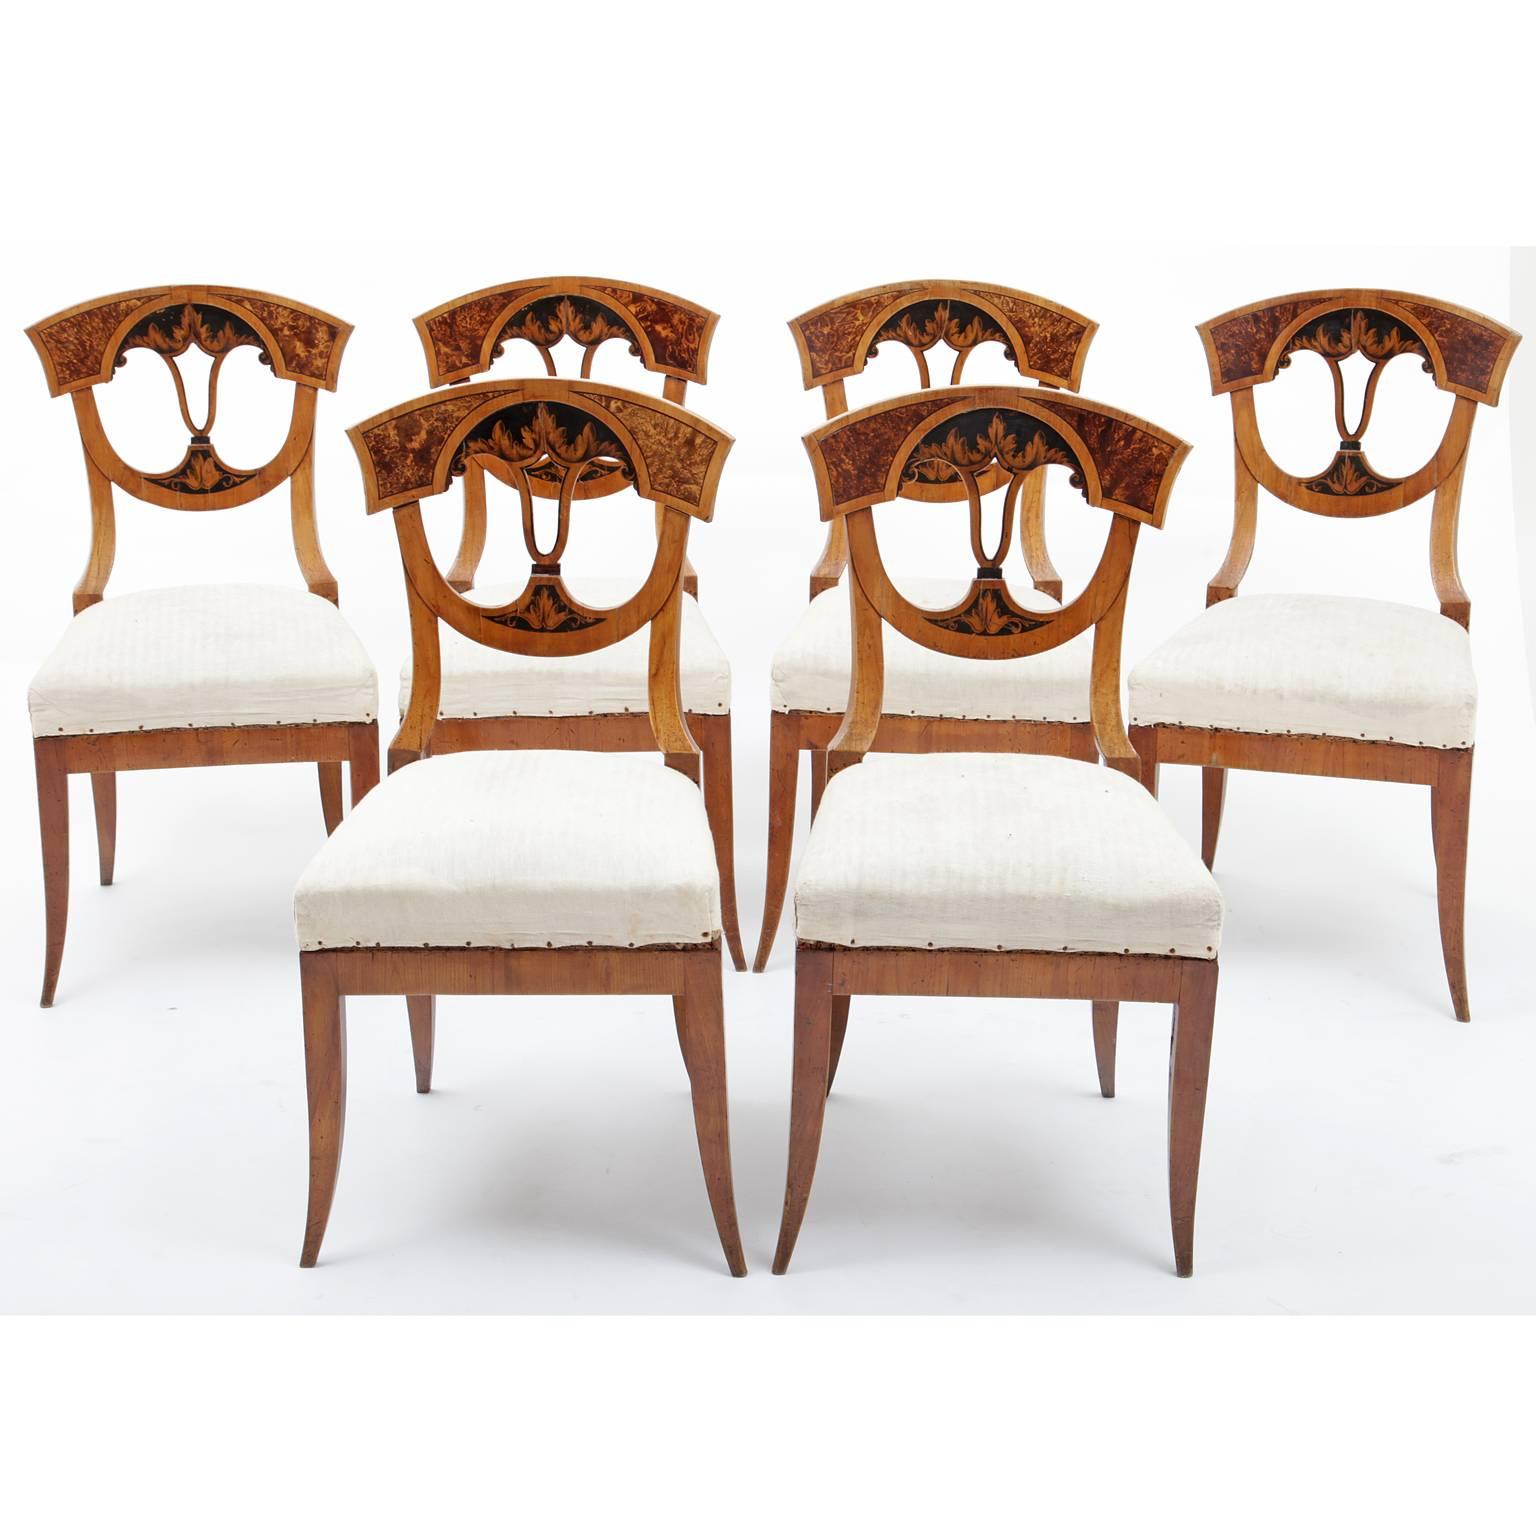 Neoclassical Dining Chairs, German, Franconia, 1820 2